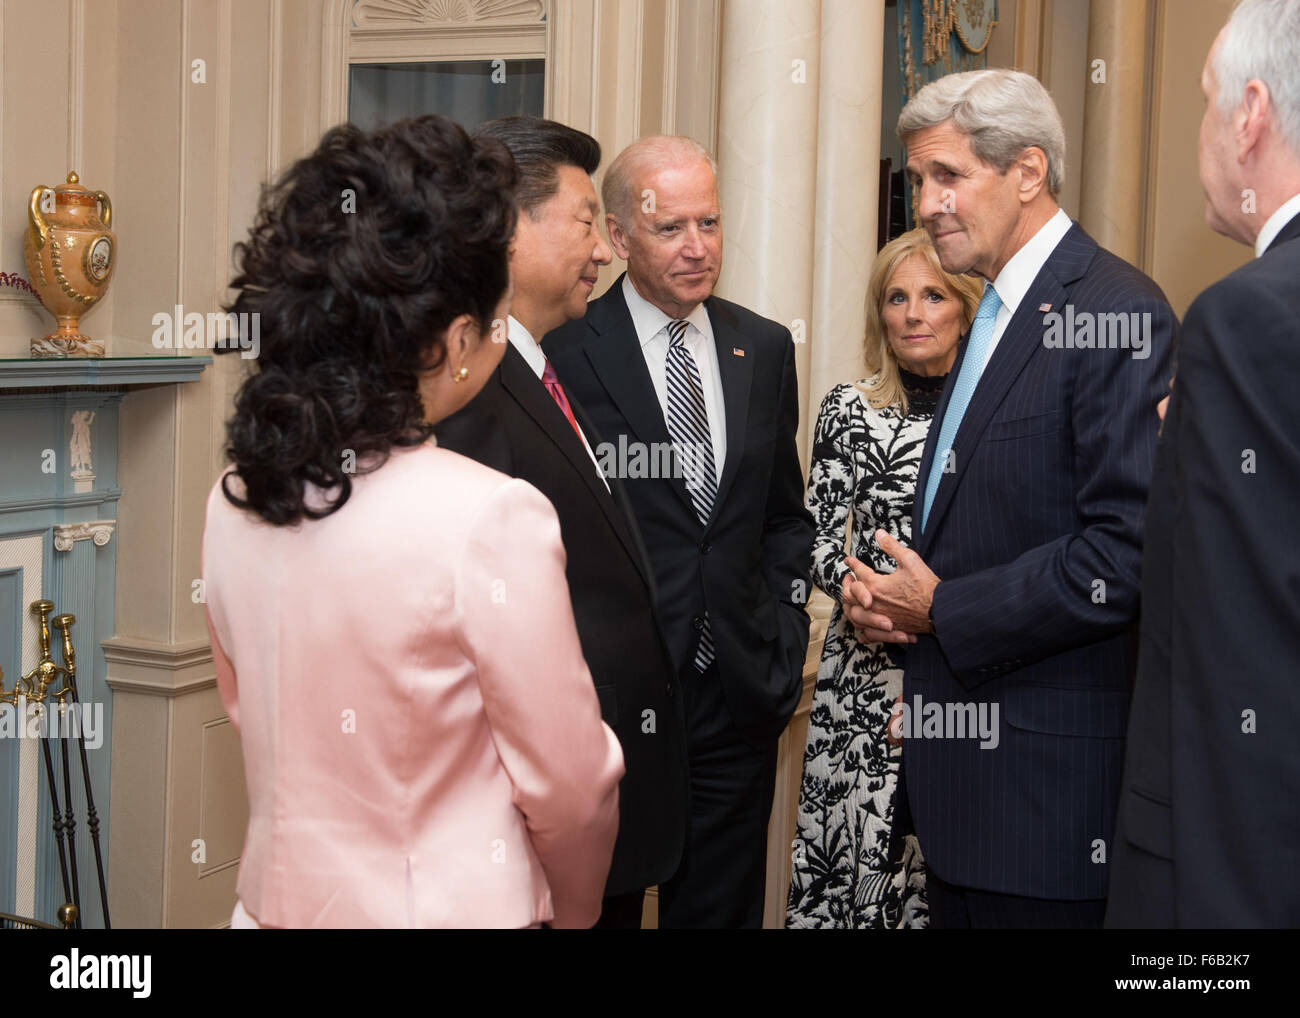 Secretary Kerry, Dr. Biden, and Vice President Biden Welcome Chiense President Xi and His Wife, Peng Liyuan, for a State Luncheon at the State Department Stock Photo